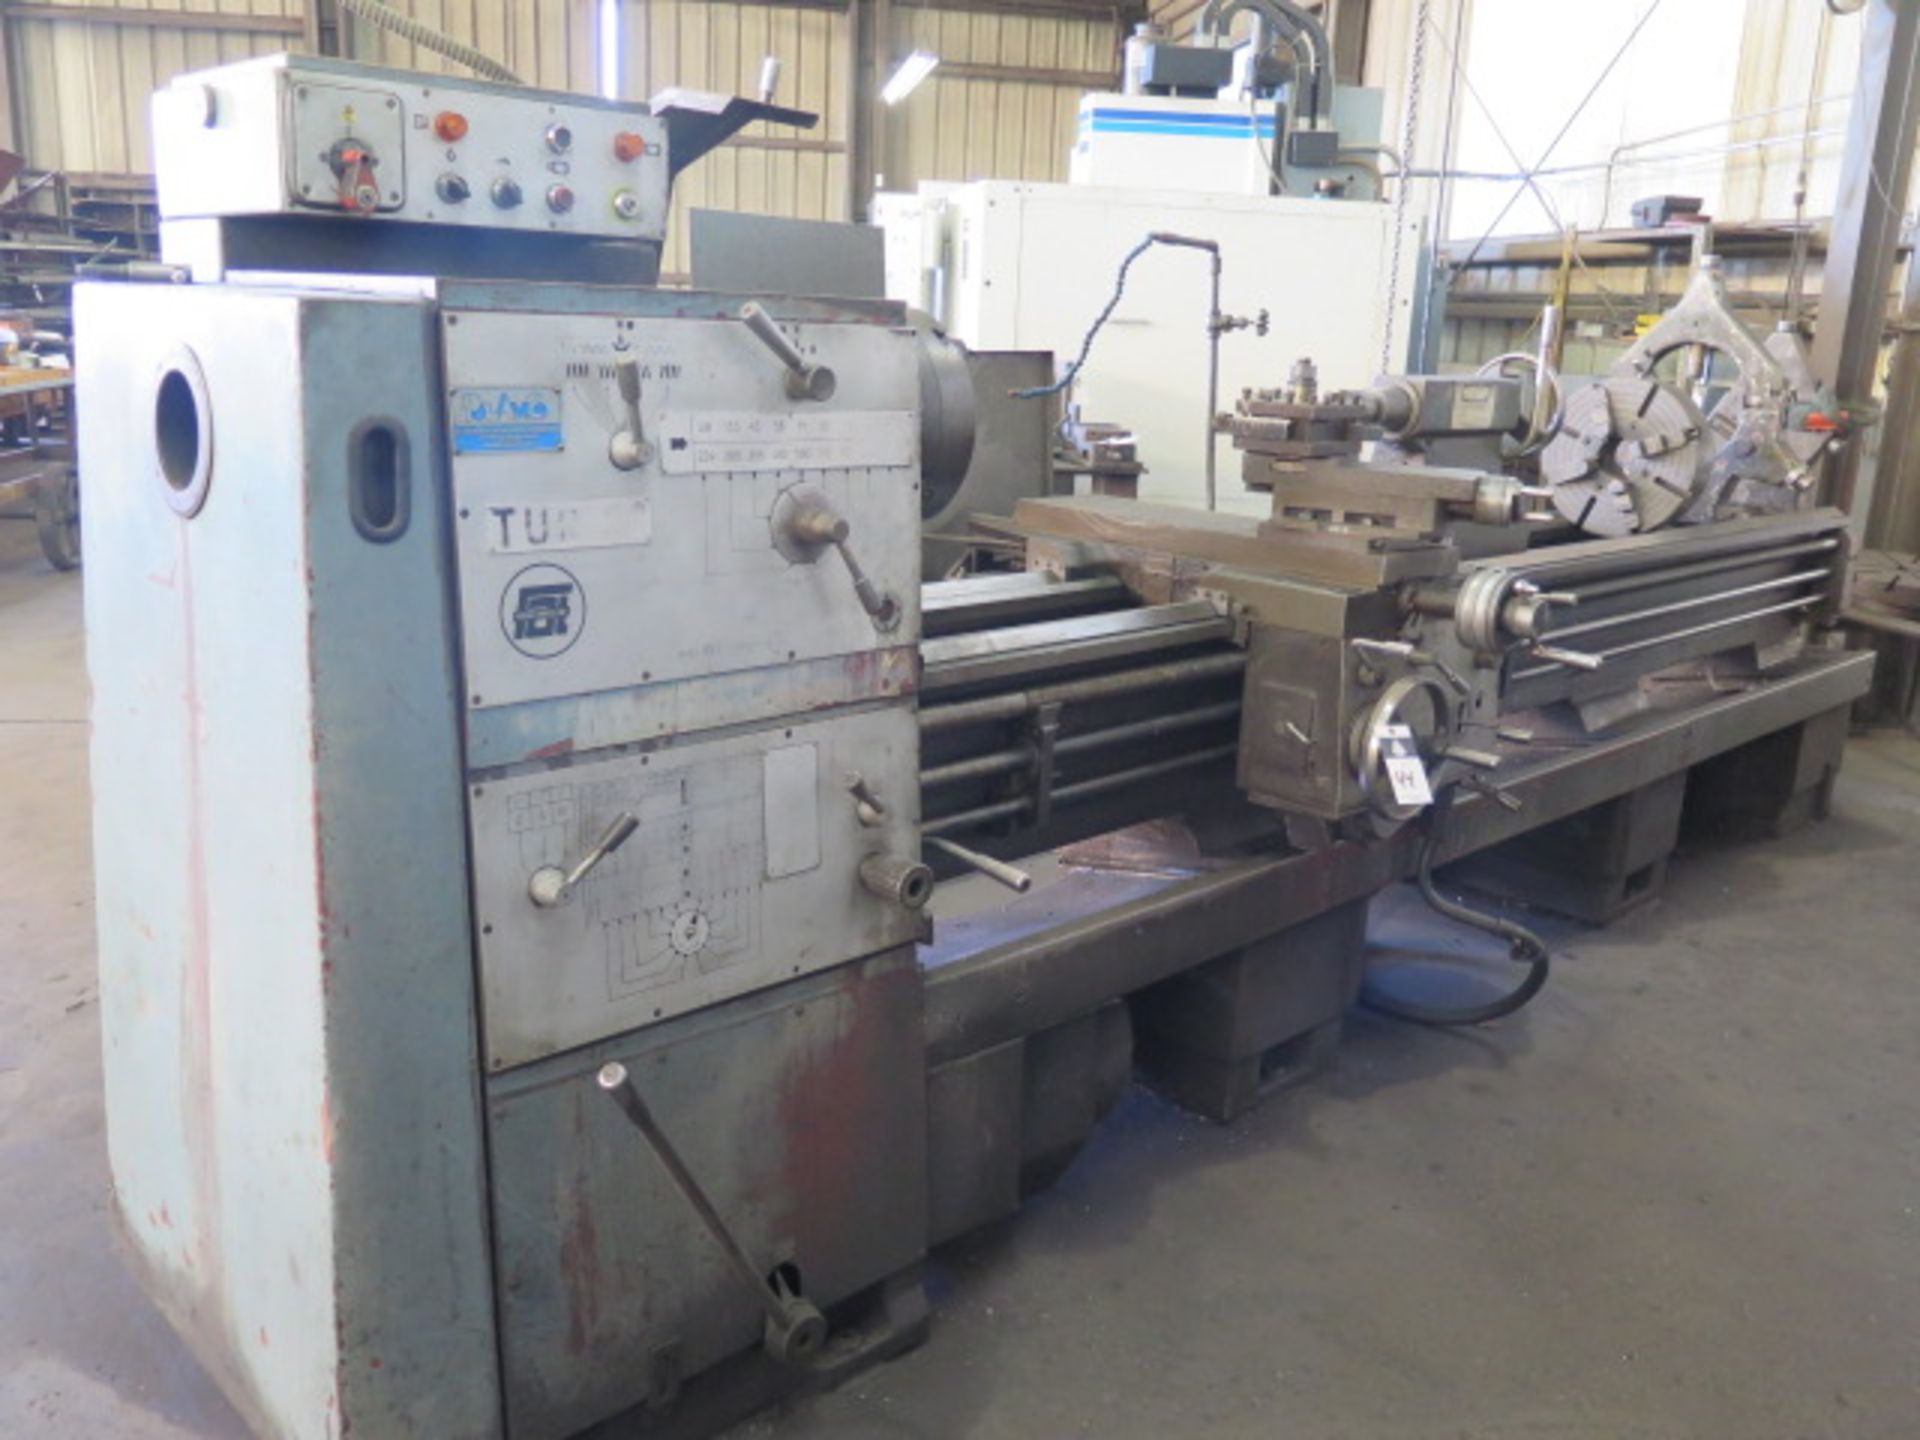 Ponar TUR-63 25” x 128” Geared Head Lathe s/n 1310 w/ 28-1200 RPM, 3 ½” Thru Spindle, SOLD AS IS